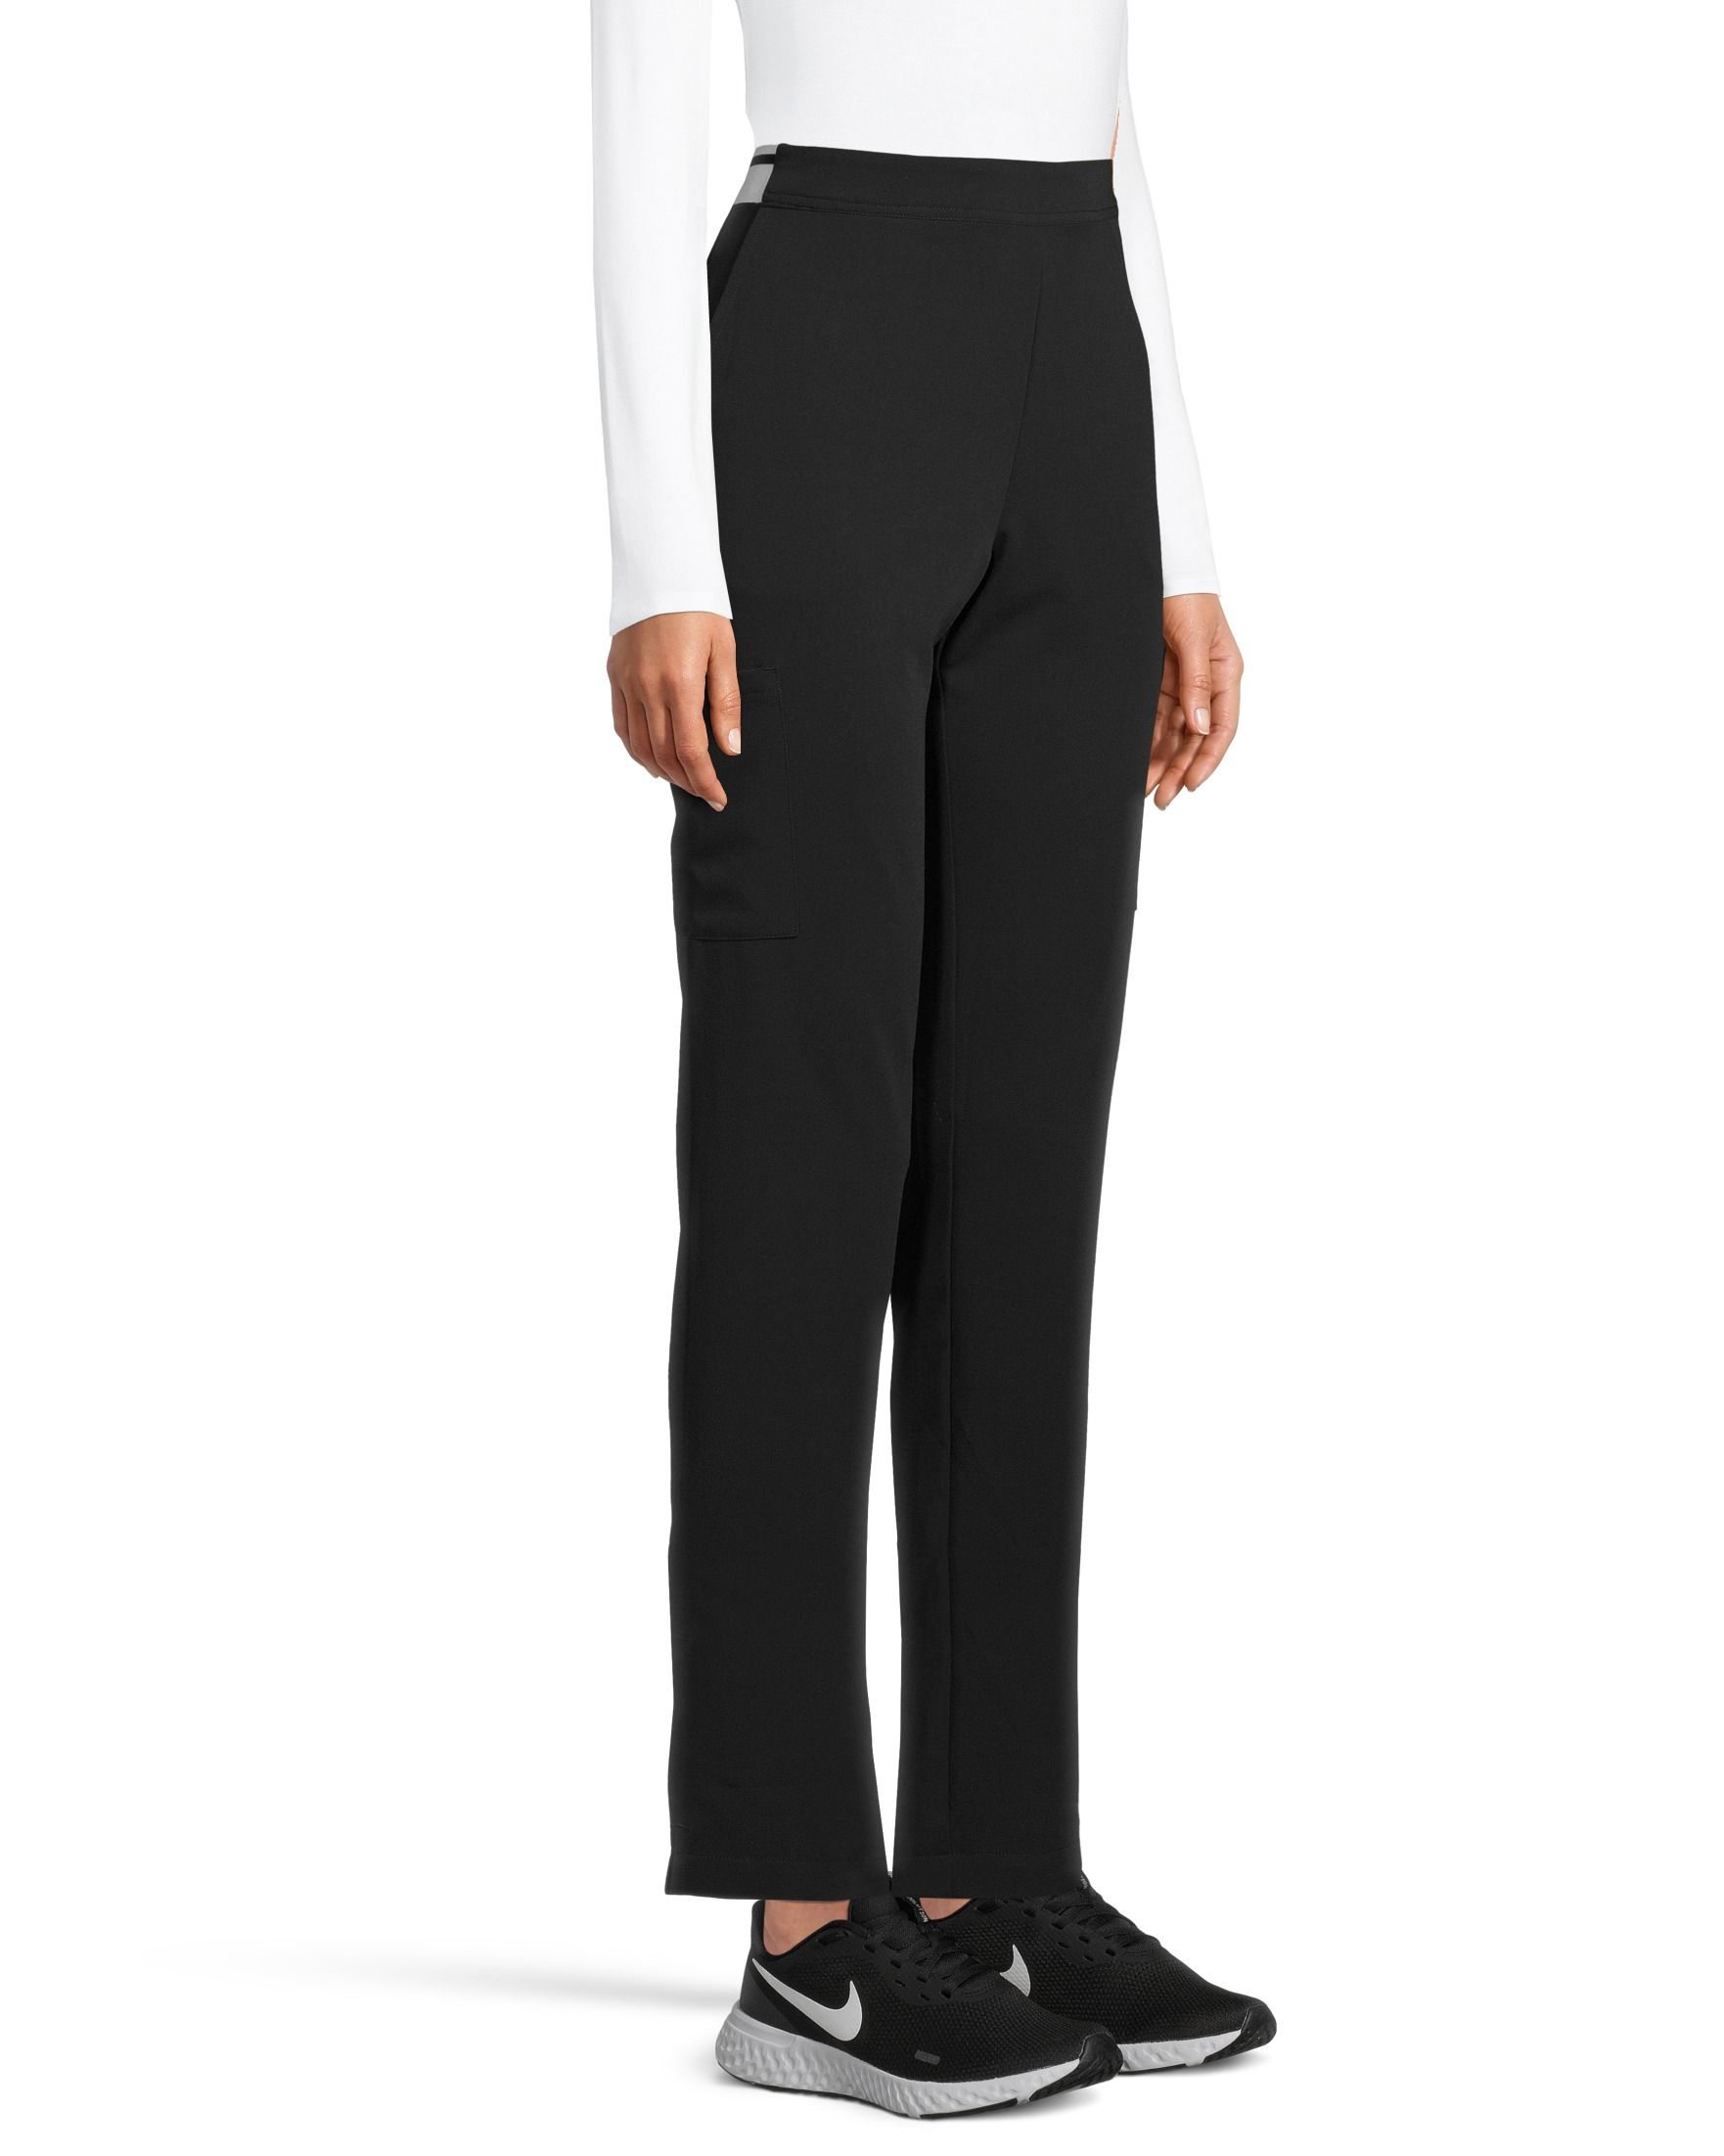 Worthington X Jason Bolden Womens Mid Rise Lined Bootcut Flat Front Pant |  CoolSprings Galleria